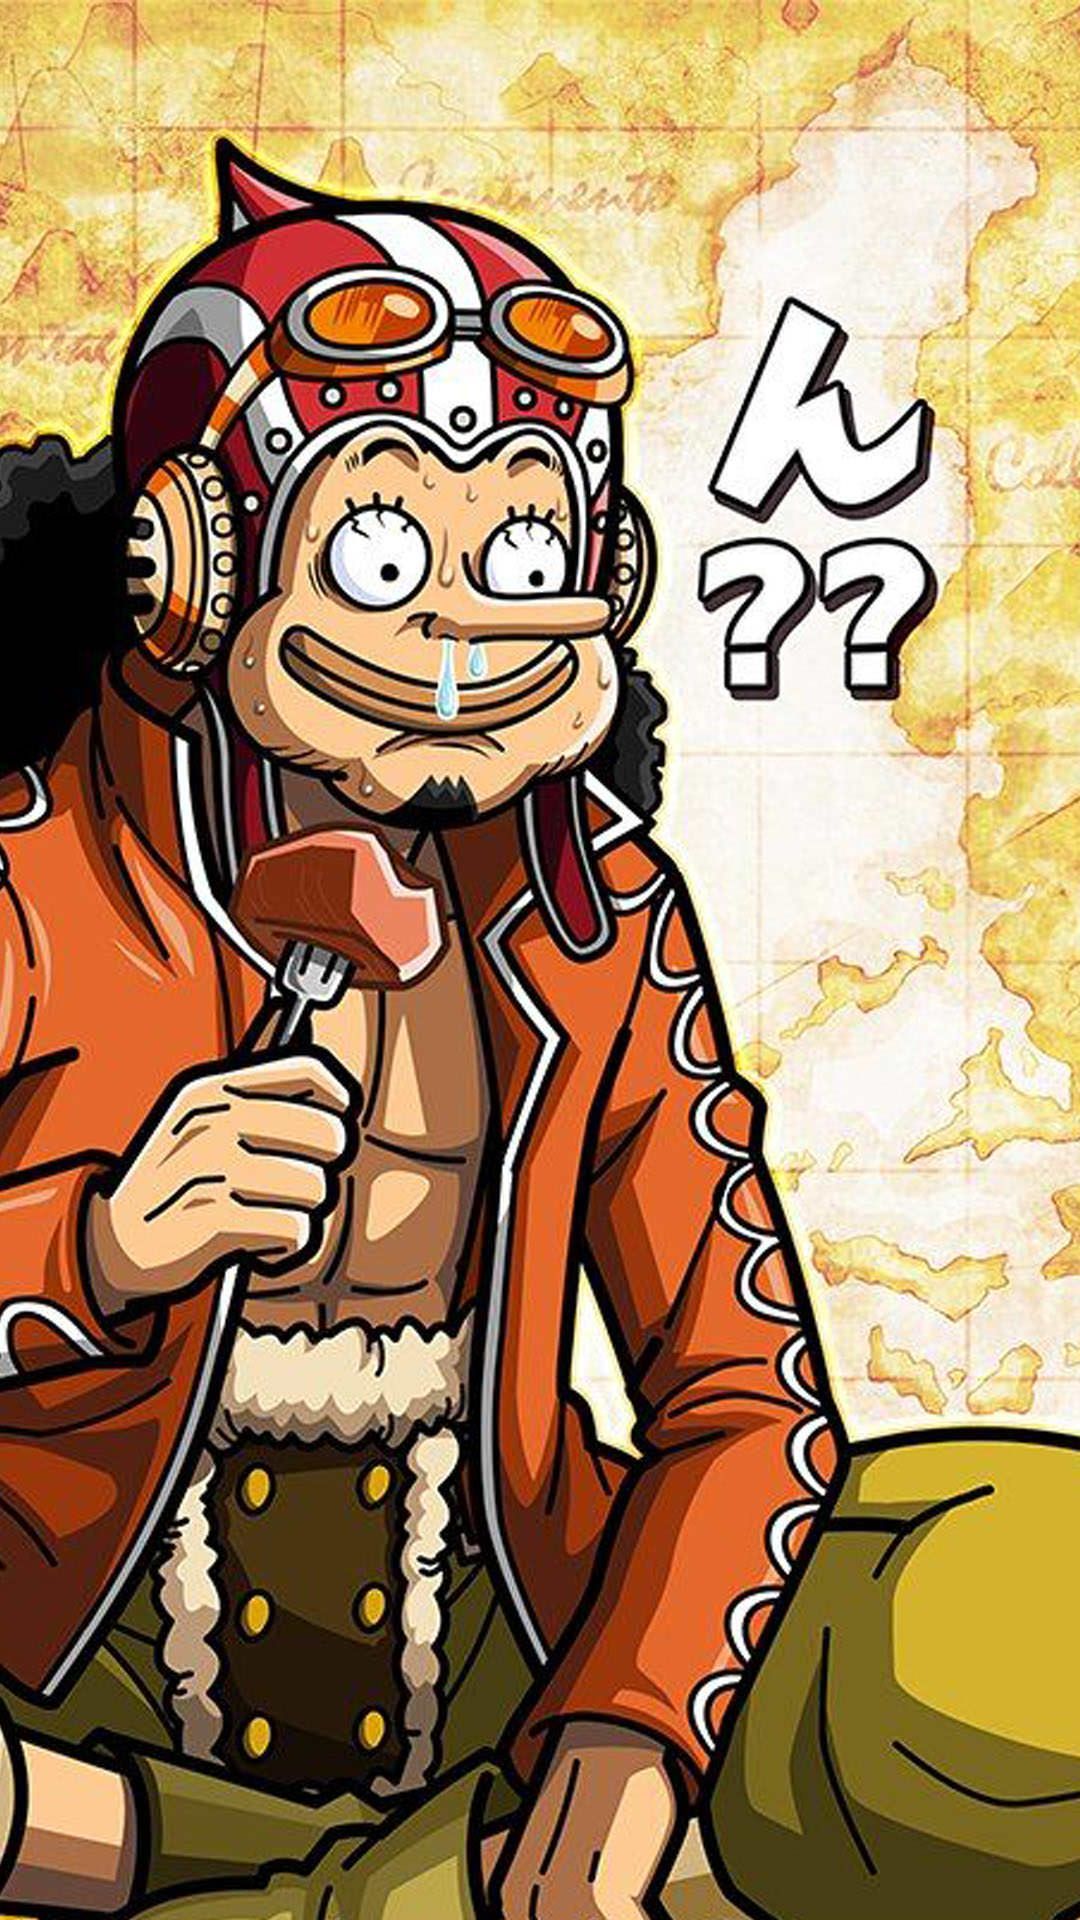 Usopp wallpaper 34. One piece main characters, One piece anime, Best anime shows